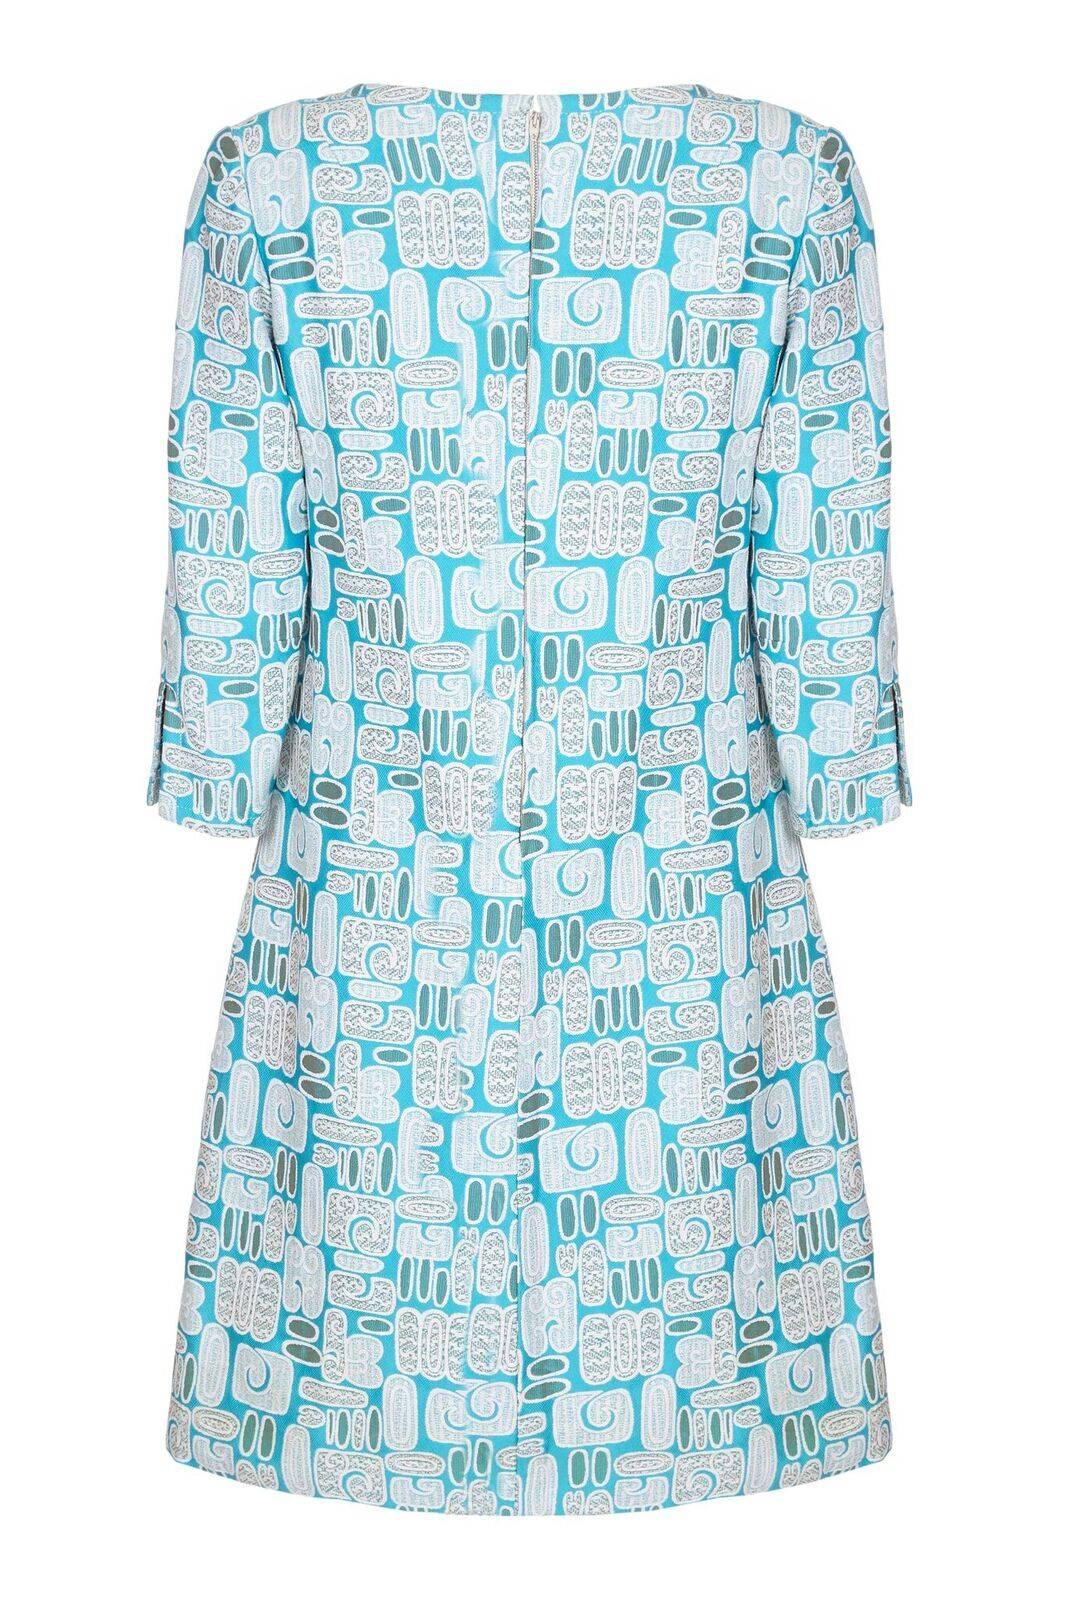 This beautiful 1960s Larry Ross dress in silk brocatelle fabric was once owned by Dame Vera Lynn and comes with a certificate of ownership. The fabric design is made up of soft geometric patterns in radiant turquoise, eggshell blue, and cream. The